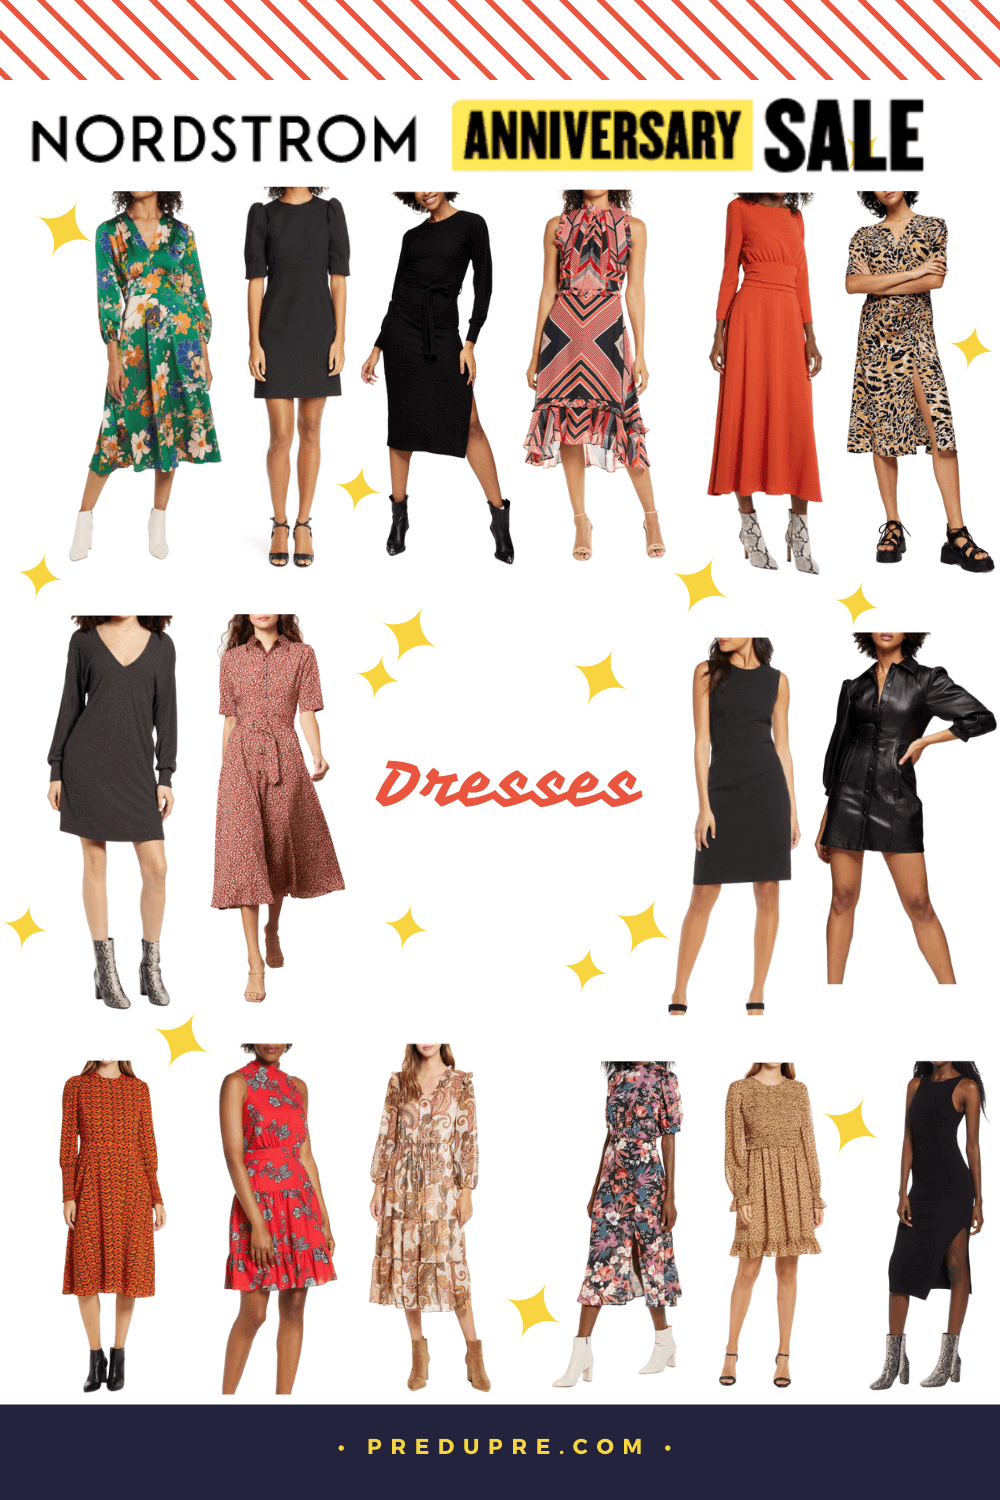 fall dresses 2020, fall dress, casual dresses, long fall dresses, women's casual midi dresses, women's dresses, maxi dresses, sweater dresses, What to wear for fall, Fall fashion inspiration, Fall fashion 2020, dressy jumpsuits, dressy rompers and jumpsuits, jumpsuits women’s, women's jumpsuits and rompers, fall jumpsuits, black jumpsuit, fall fashion outfits, fall outfits, fall outfit ideas, fall outfits 2020, fall outfit ideas 2020, fall clothes, what to wear in fall, ideas for fall fashionhow to style fall clothing, Nordstrom anniversary sale, #nsale, Nordstrom anniversary sale 2020,